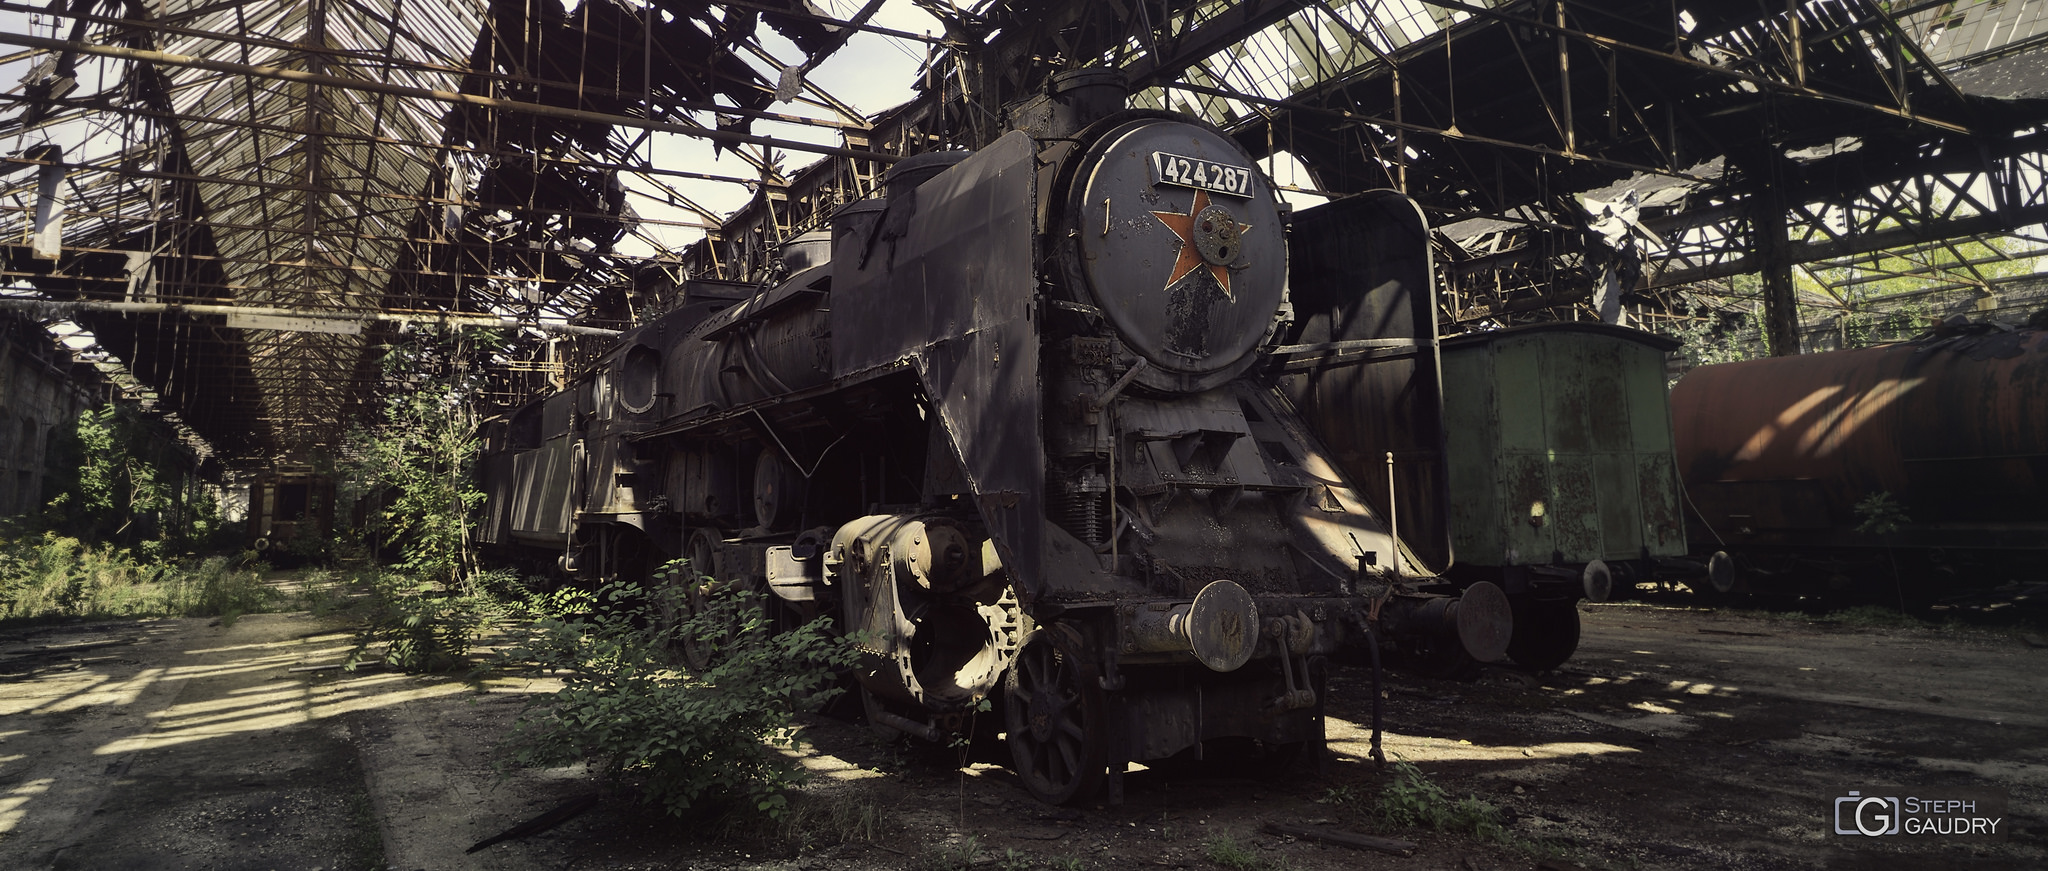 Lost city / MÁV 424-287 (Abandoned Red star train)